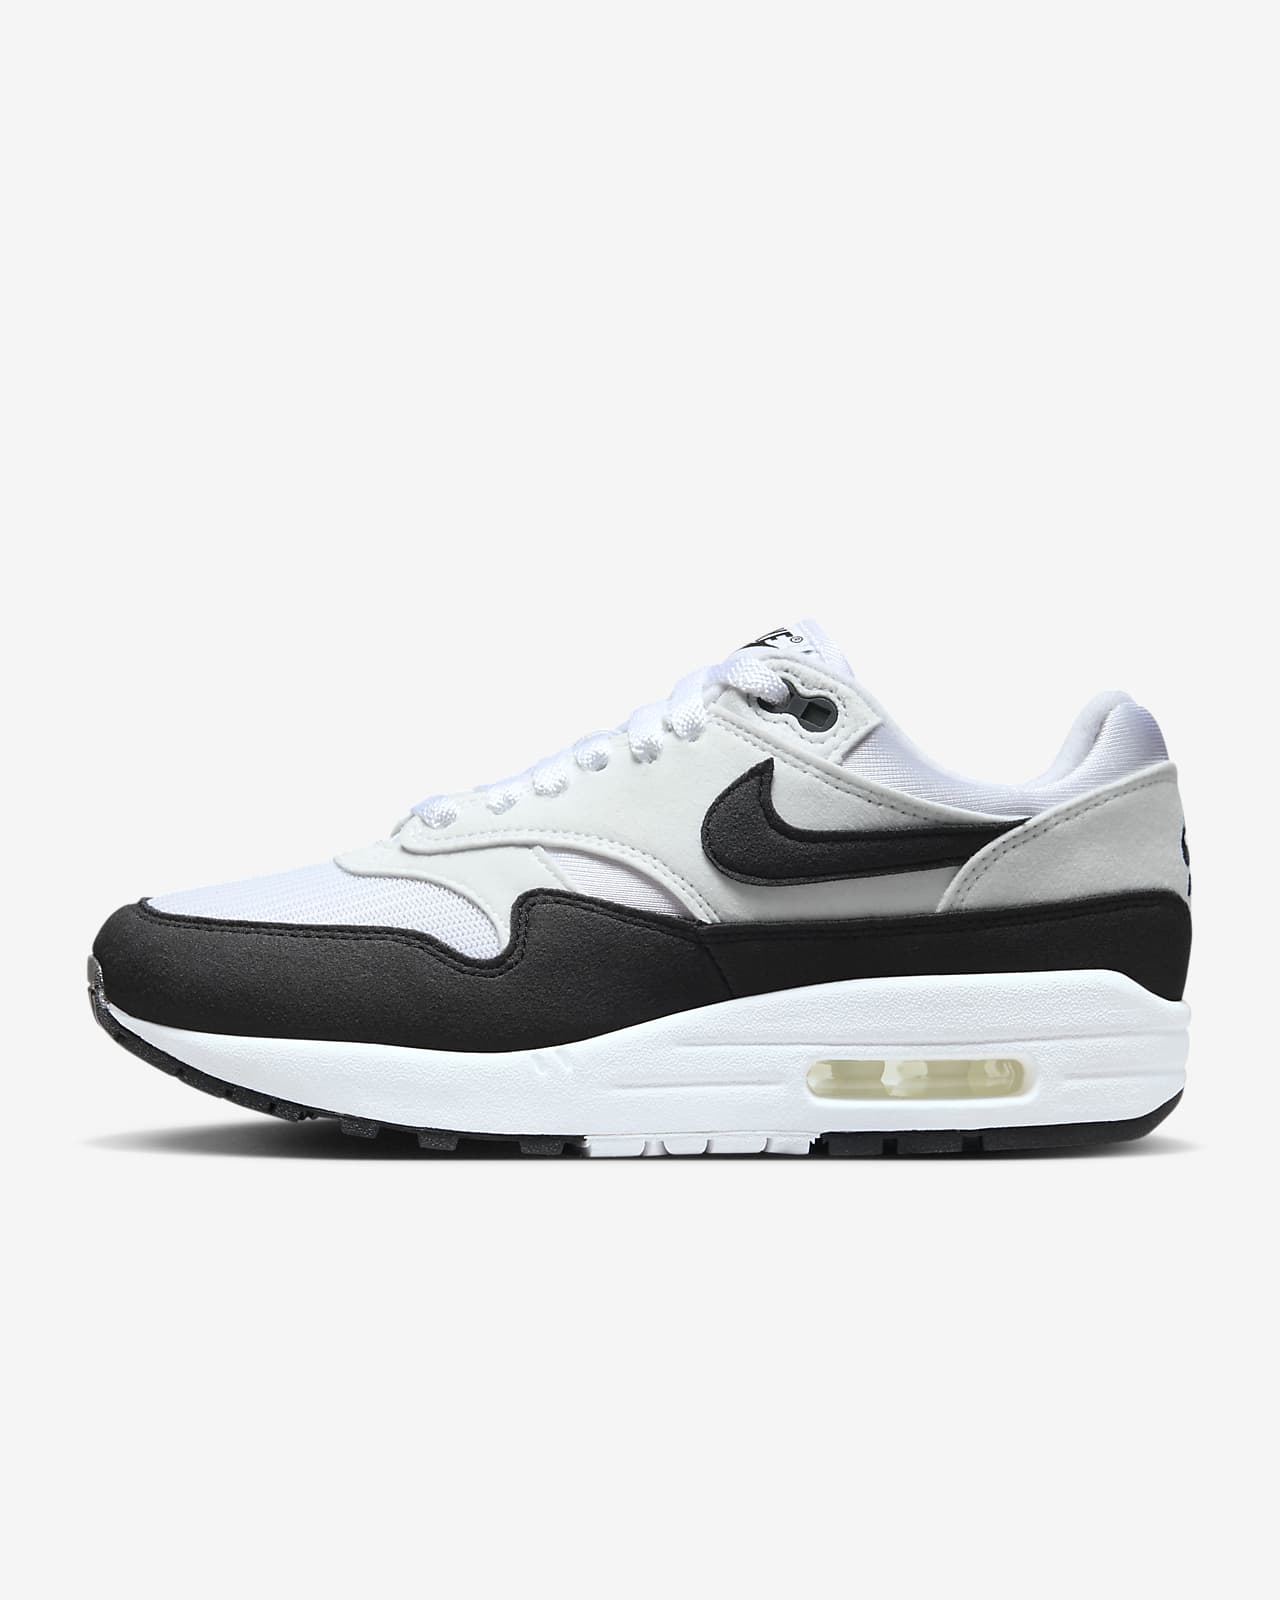 Nike Air Max 1 Womens Shoes Review